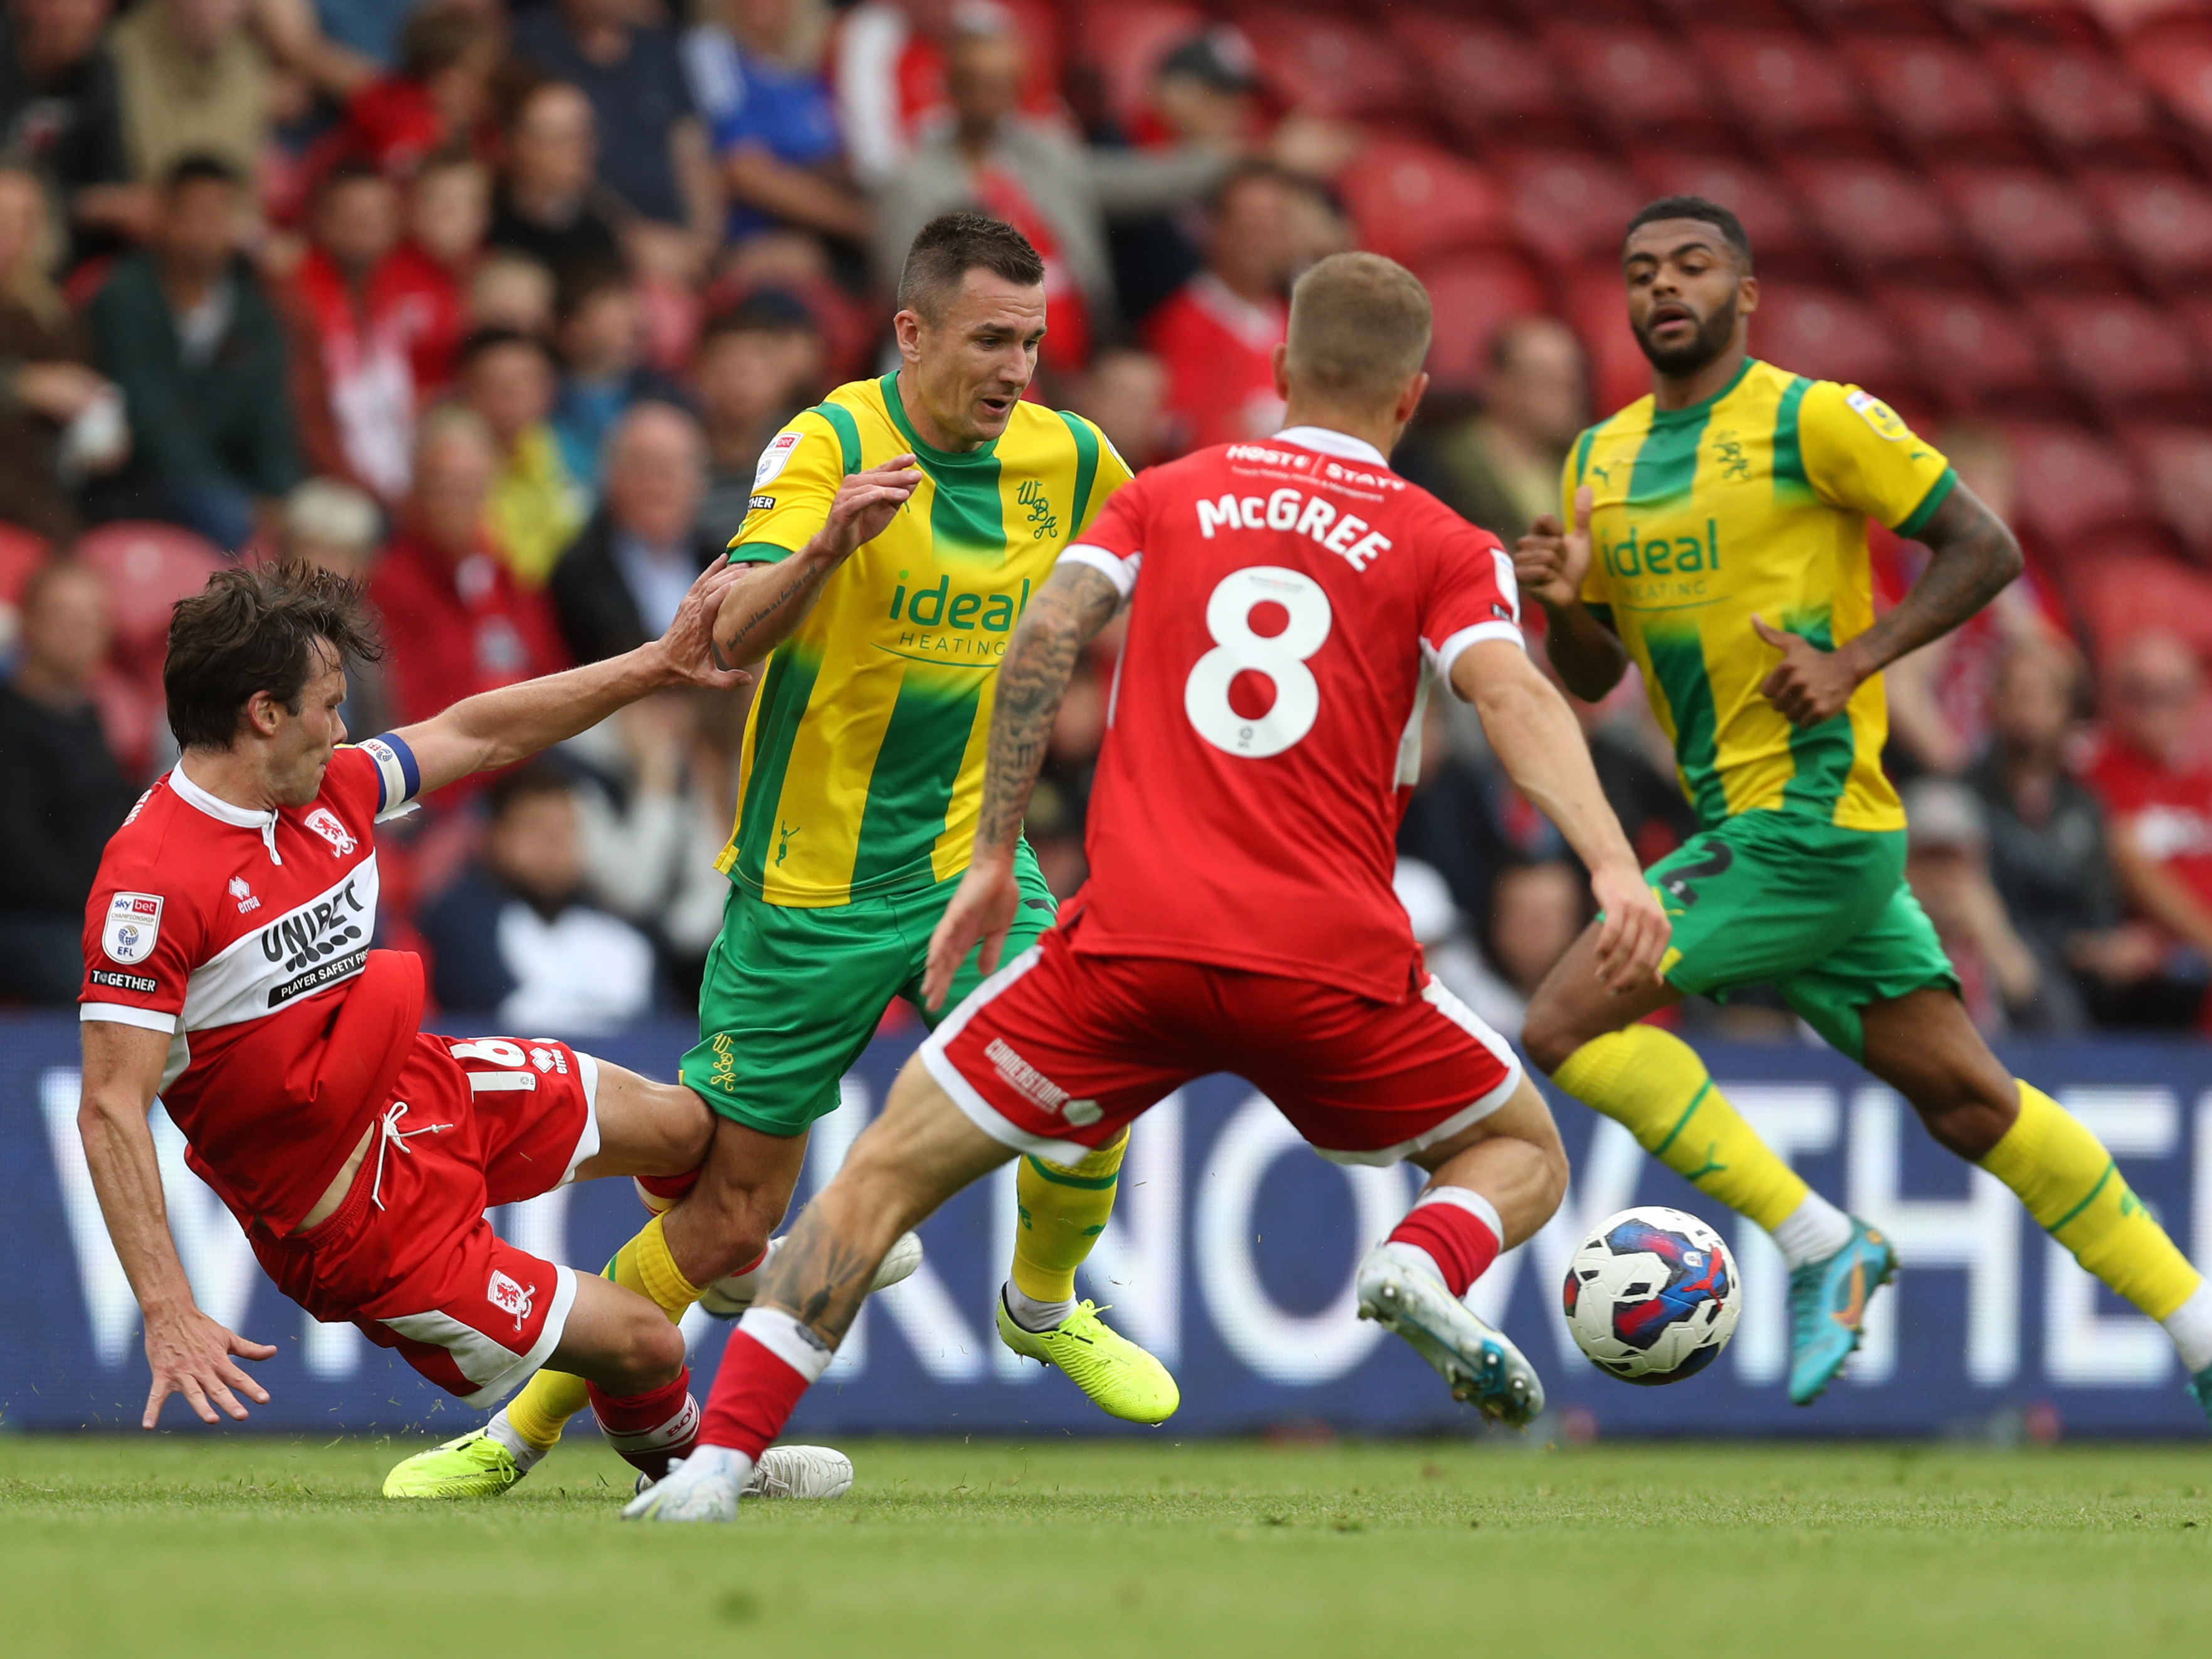 Jed Wallace in action at Boro